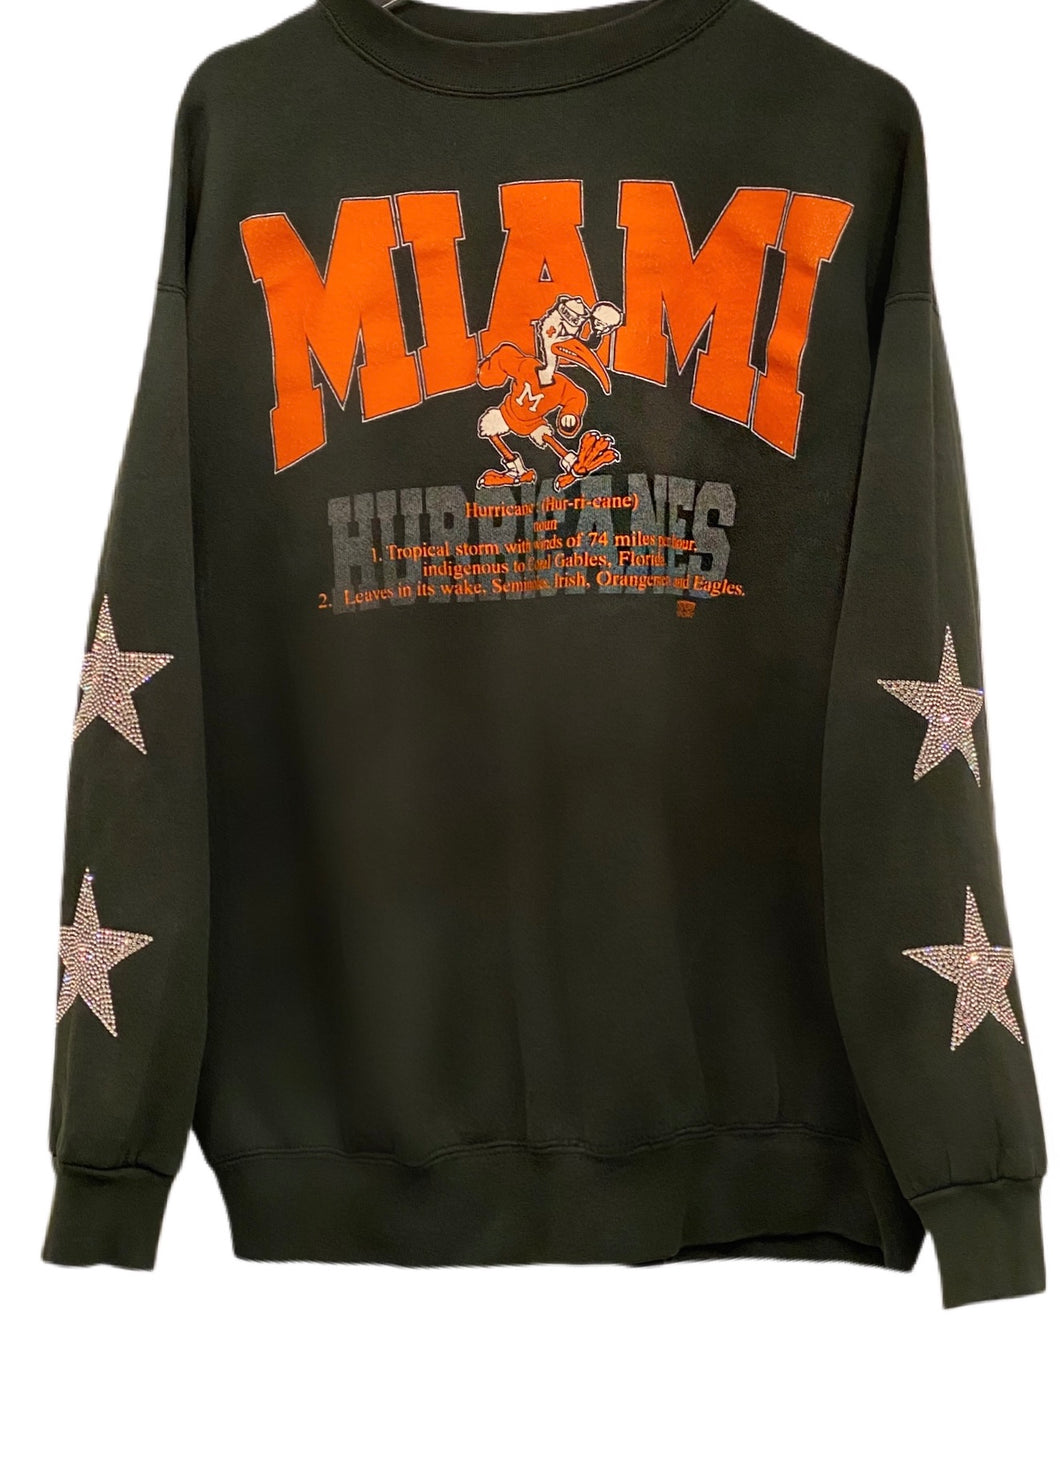 University of Miami, One of a KIND Vintage UM Hurricanes Sweatshirt with Crystal Star Design